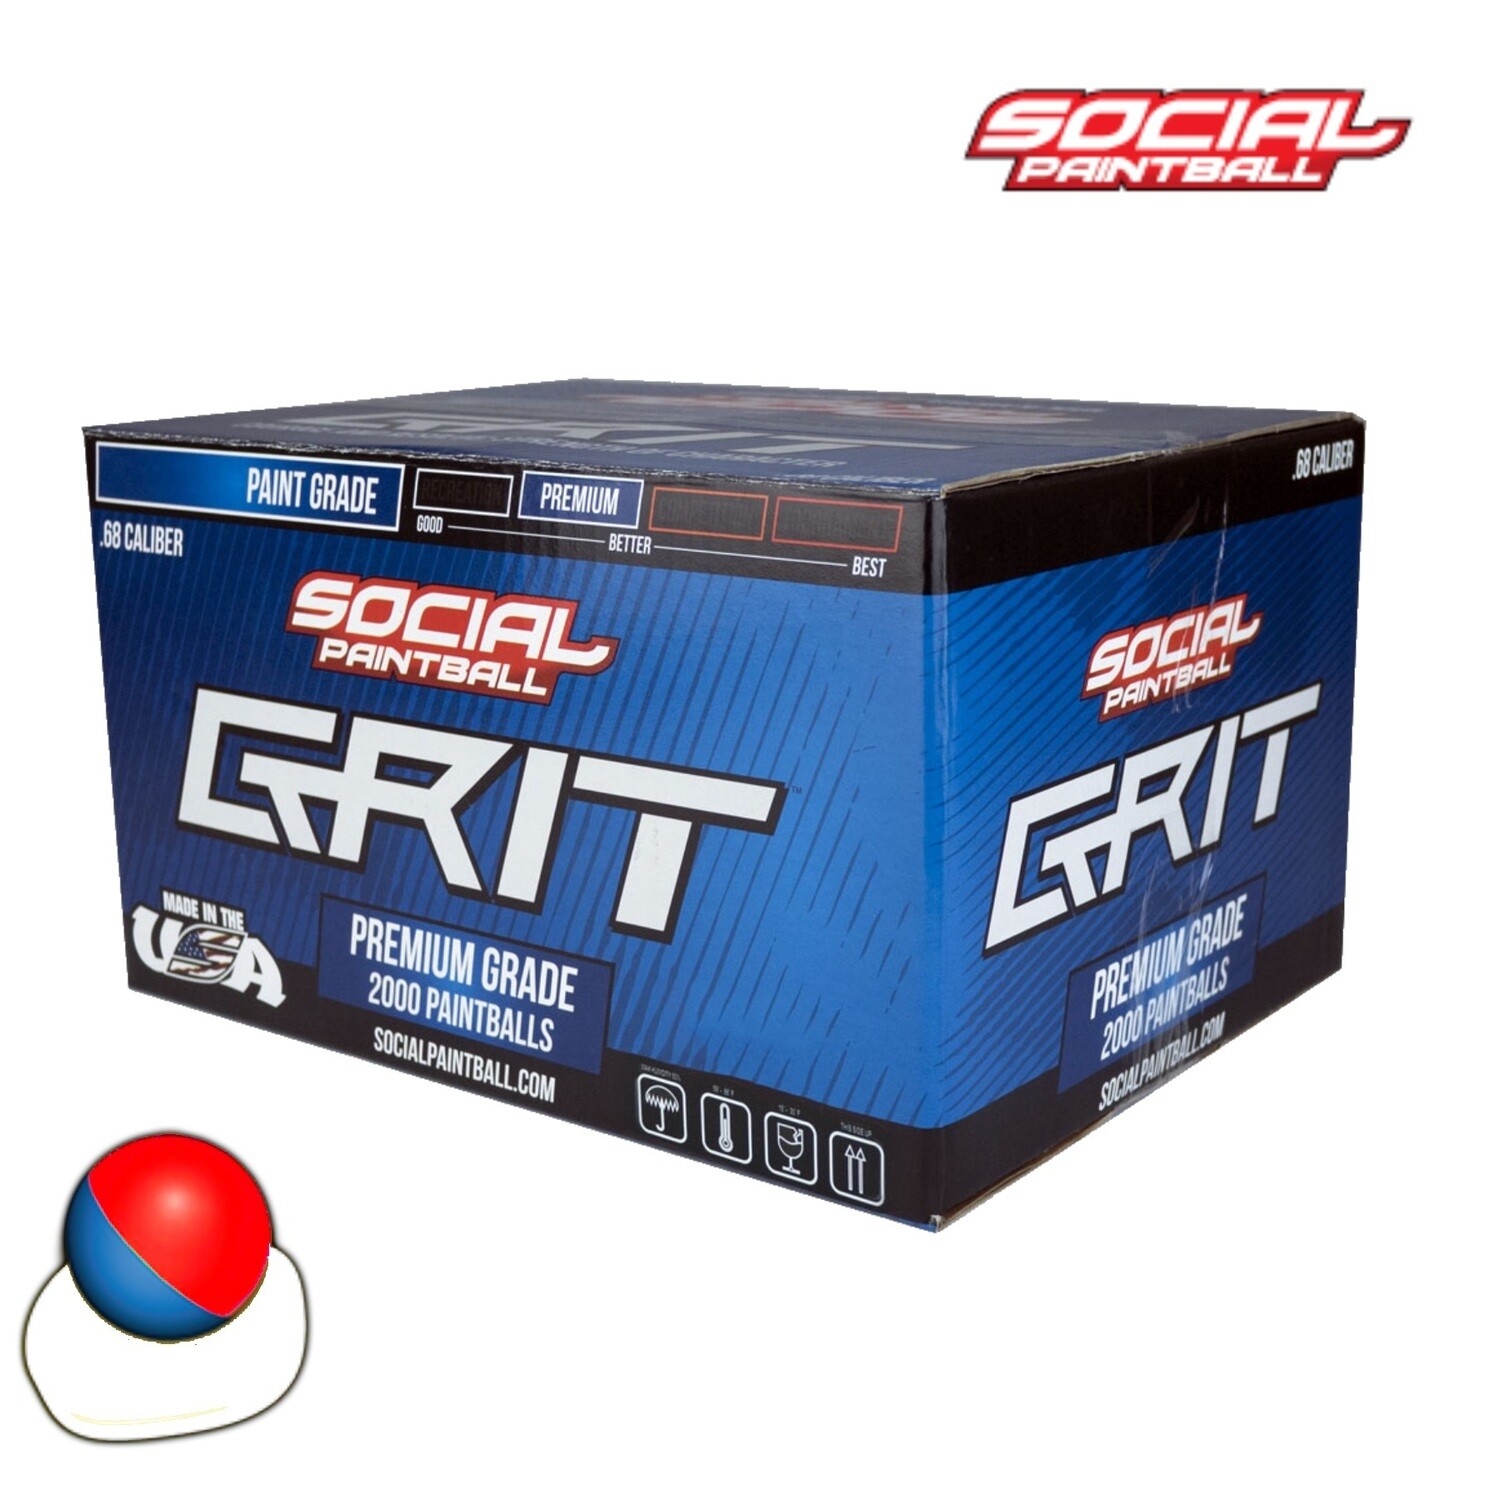 Social Paintball Grit .68 cal Paintballs - Case of 2000 Rds - Blue/Red Shell - White Fill